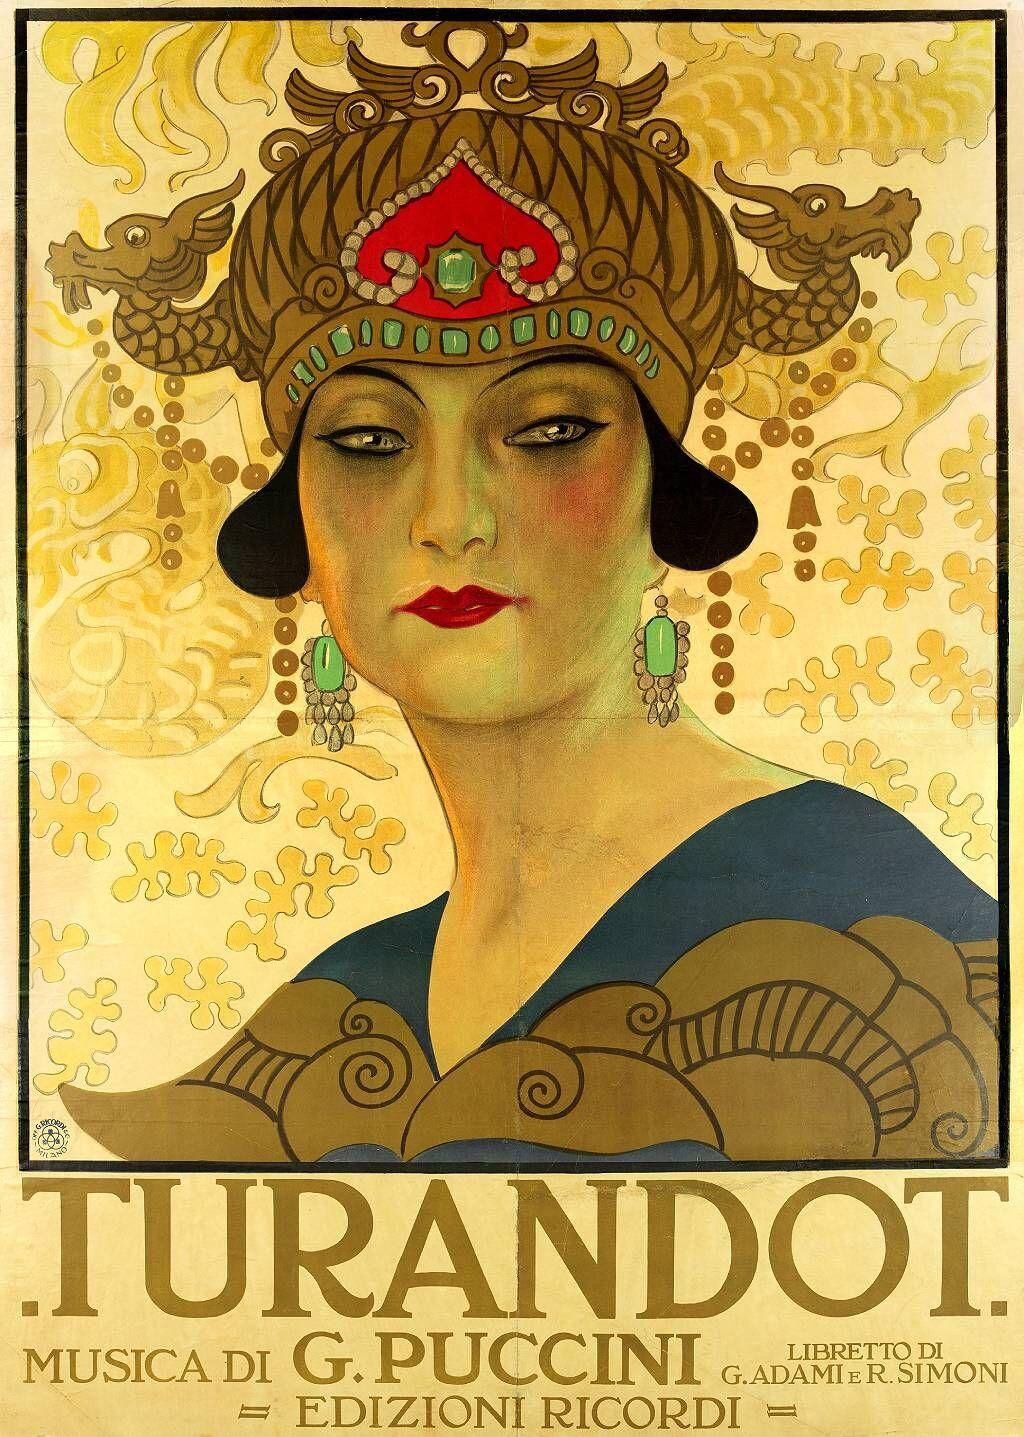 The opera is based on a story from the book by François Pétis de la Croix (1710) in which Khutulun is called Turandot, which means 